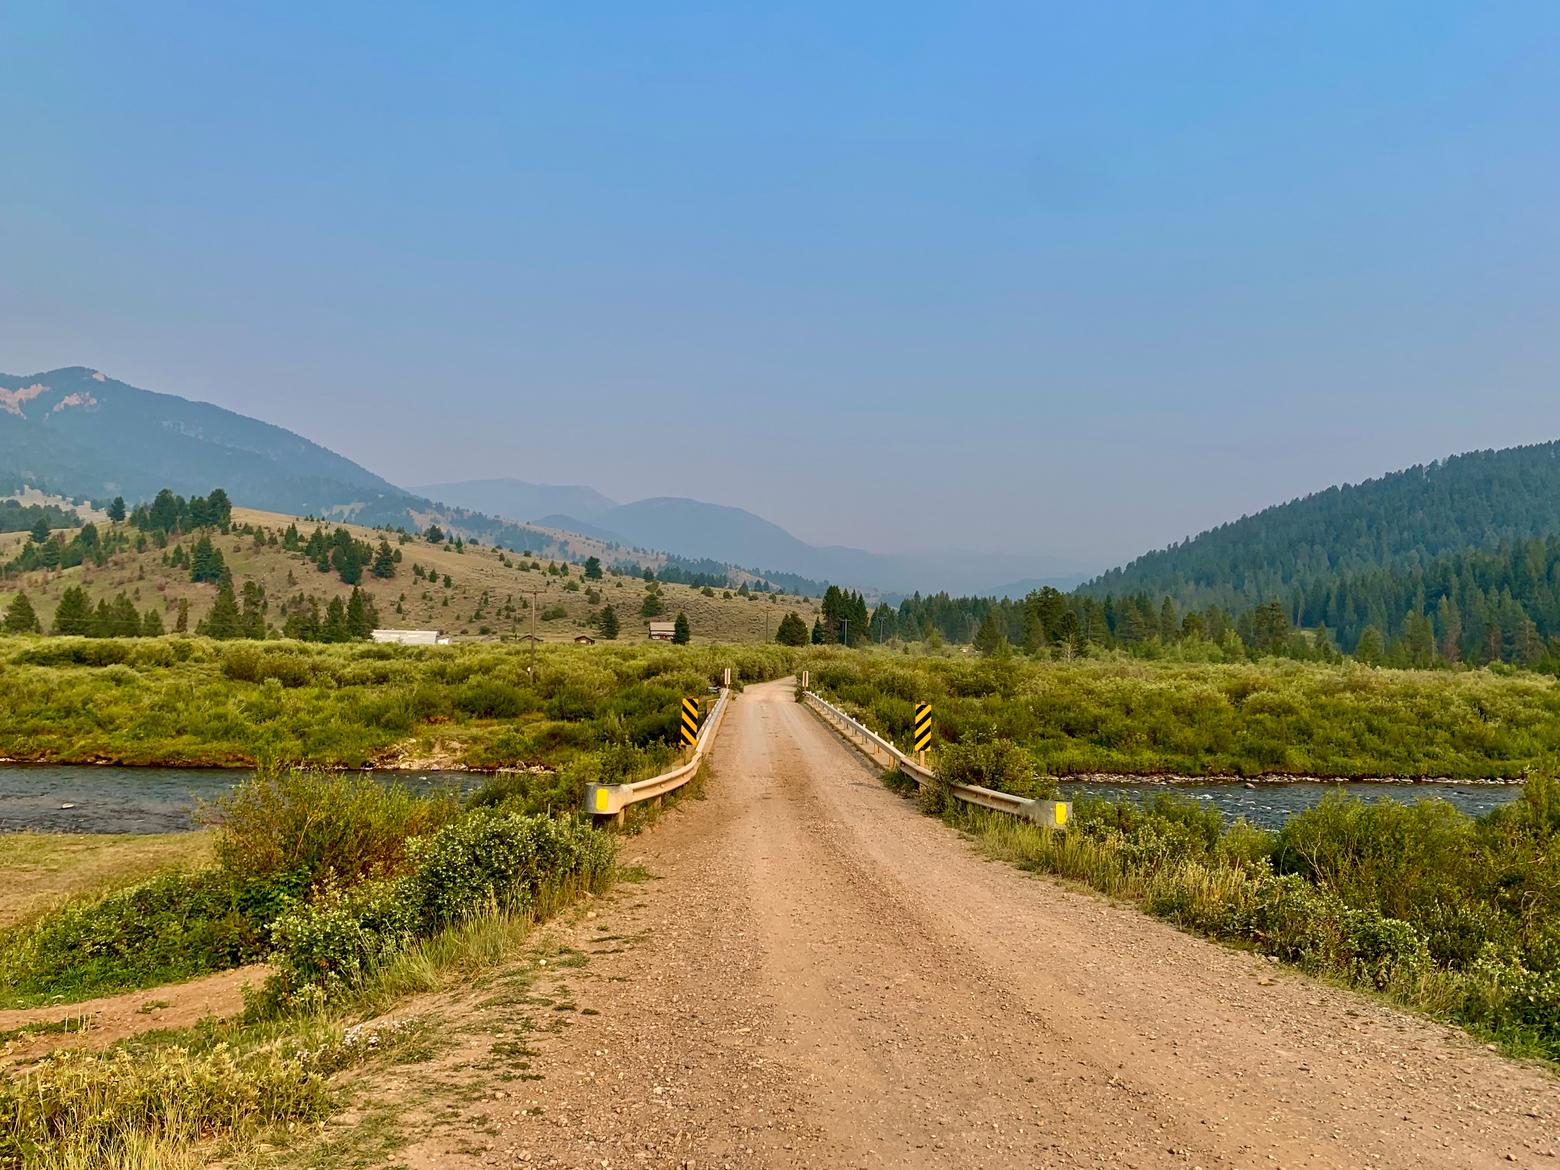 The dirt road passing over the Gallatin River south of Big Sky and gateway into the Porcupine Creek drainage, one of the most biologically-diverse corridors of the Gallatin Range. During the 1990s, developer Tim Blixseth parked a bulldozer in front of the Porcupine as a bold warning to conservation-minded citizens and the public—get him the land swap and cash he wanted for parcels he owned in the Porcupine or earthmoving equipment might roll. Gutkoski called out Blixseth's hardball maneuvering as crass and being out of step with Montana values. And he said conservationists need to be equally as vigilant in trying to protect areas like the Porcupine as those who want to exploit them for their own self-interests. "Wildlife can't advocate for itself. We need to give the animals a stronger voice," he said. Photo by Todd Wilkinson